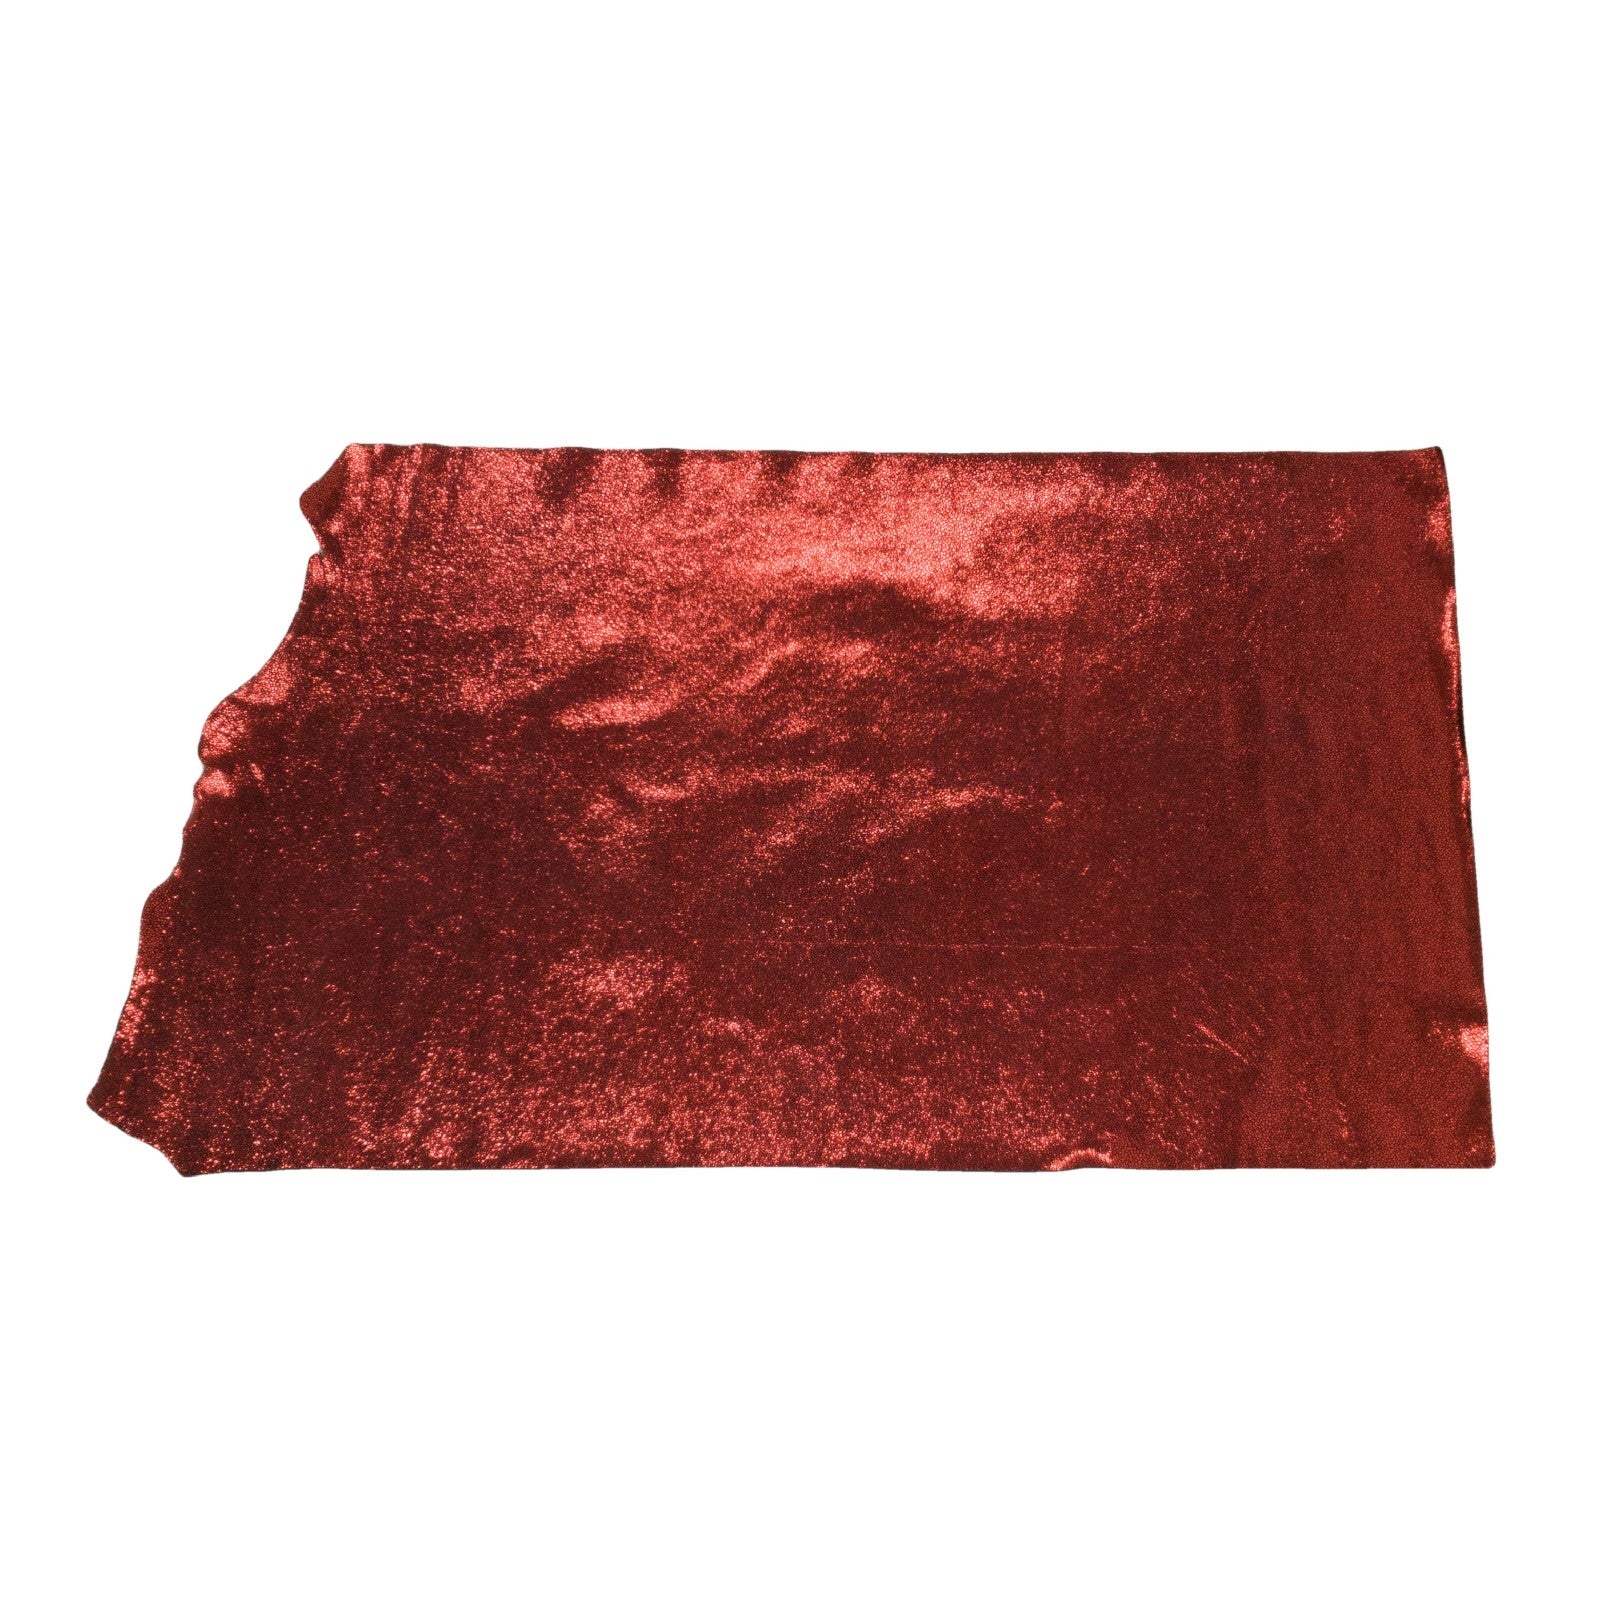 Metallic Red Sizzling Stingray 2-3 oz Cow Hides, Middle Piece / 6.5-7.5 Sq Ft | The Leather Guy